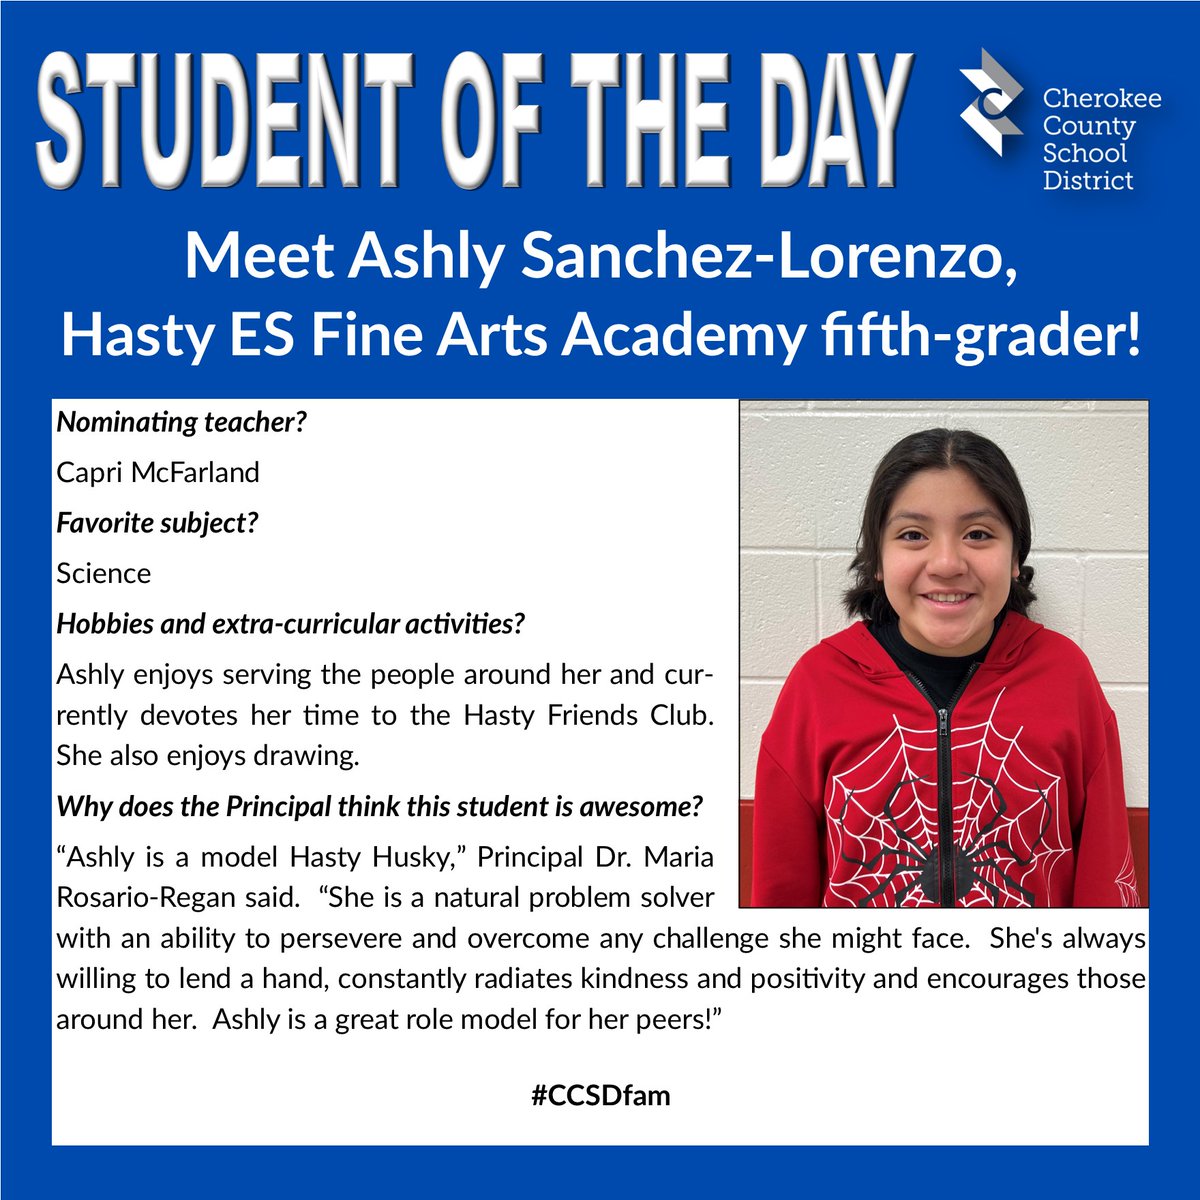 CCSD's 'Student of the Day' is announced on WLJA 101.1 FM between 7-7:15 a.m. and 5-5:15 p.m. each school day, and we highlight these outstanding students here, too. #CCSDfam